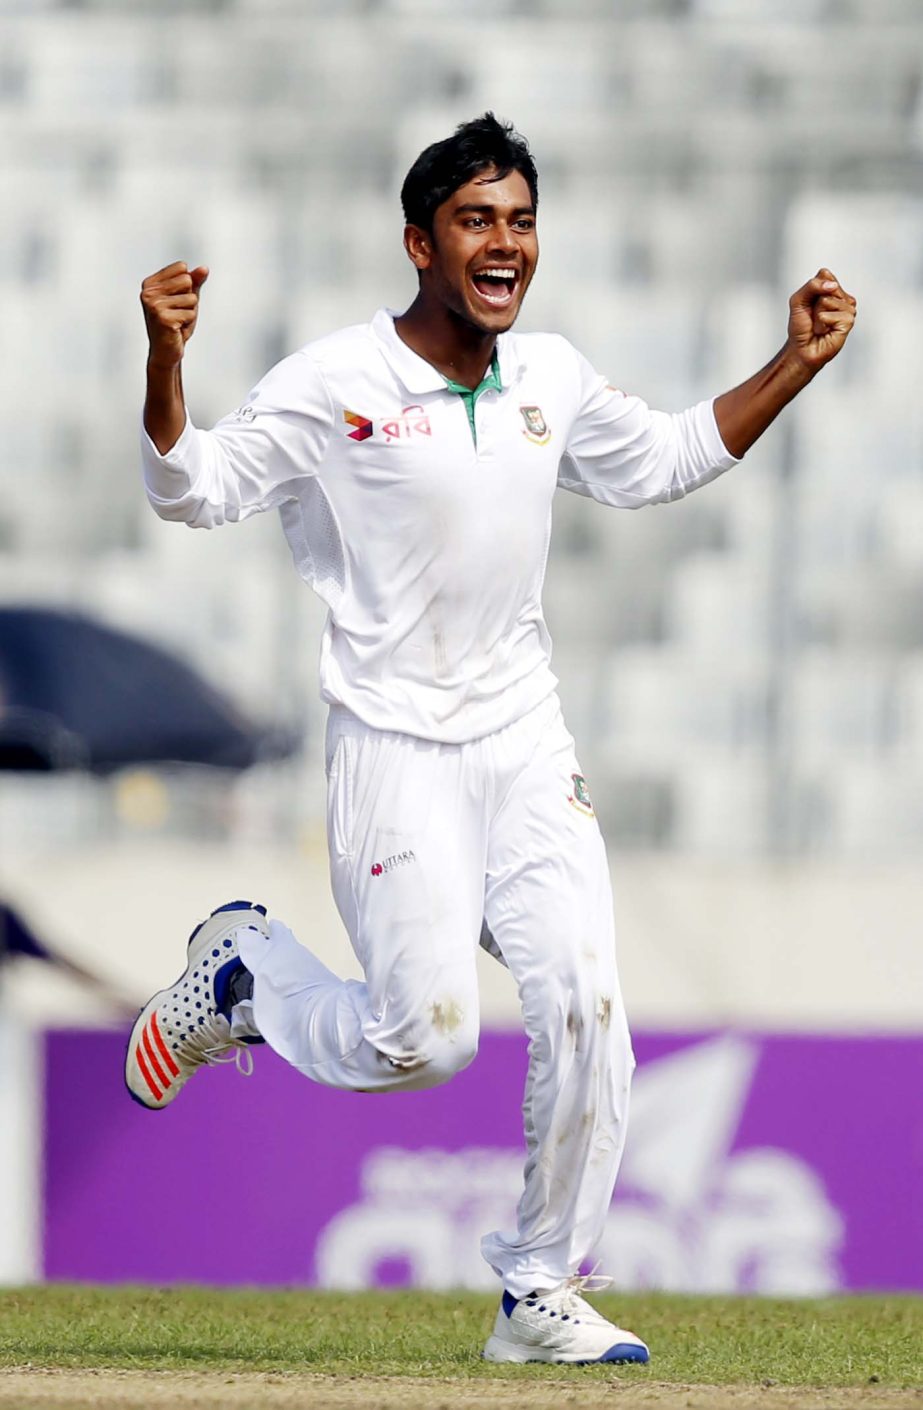 Bangladesh's Mehedi Hasan Miraz celebrates the dismissal of England's Jonny Bairstow during their second day of the second cricket test match in Dhaka, Bangladesh on Saturday.